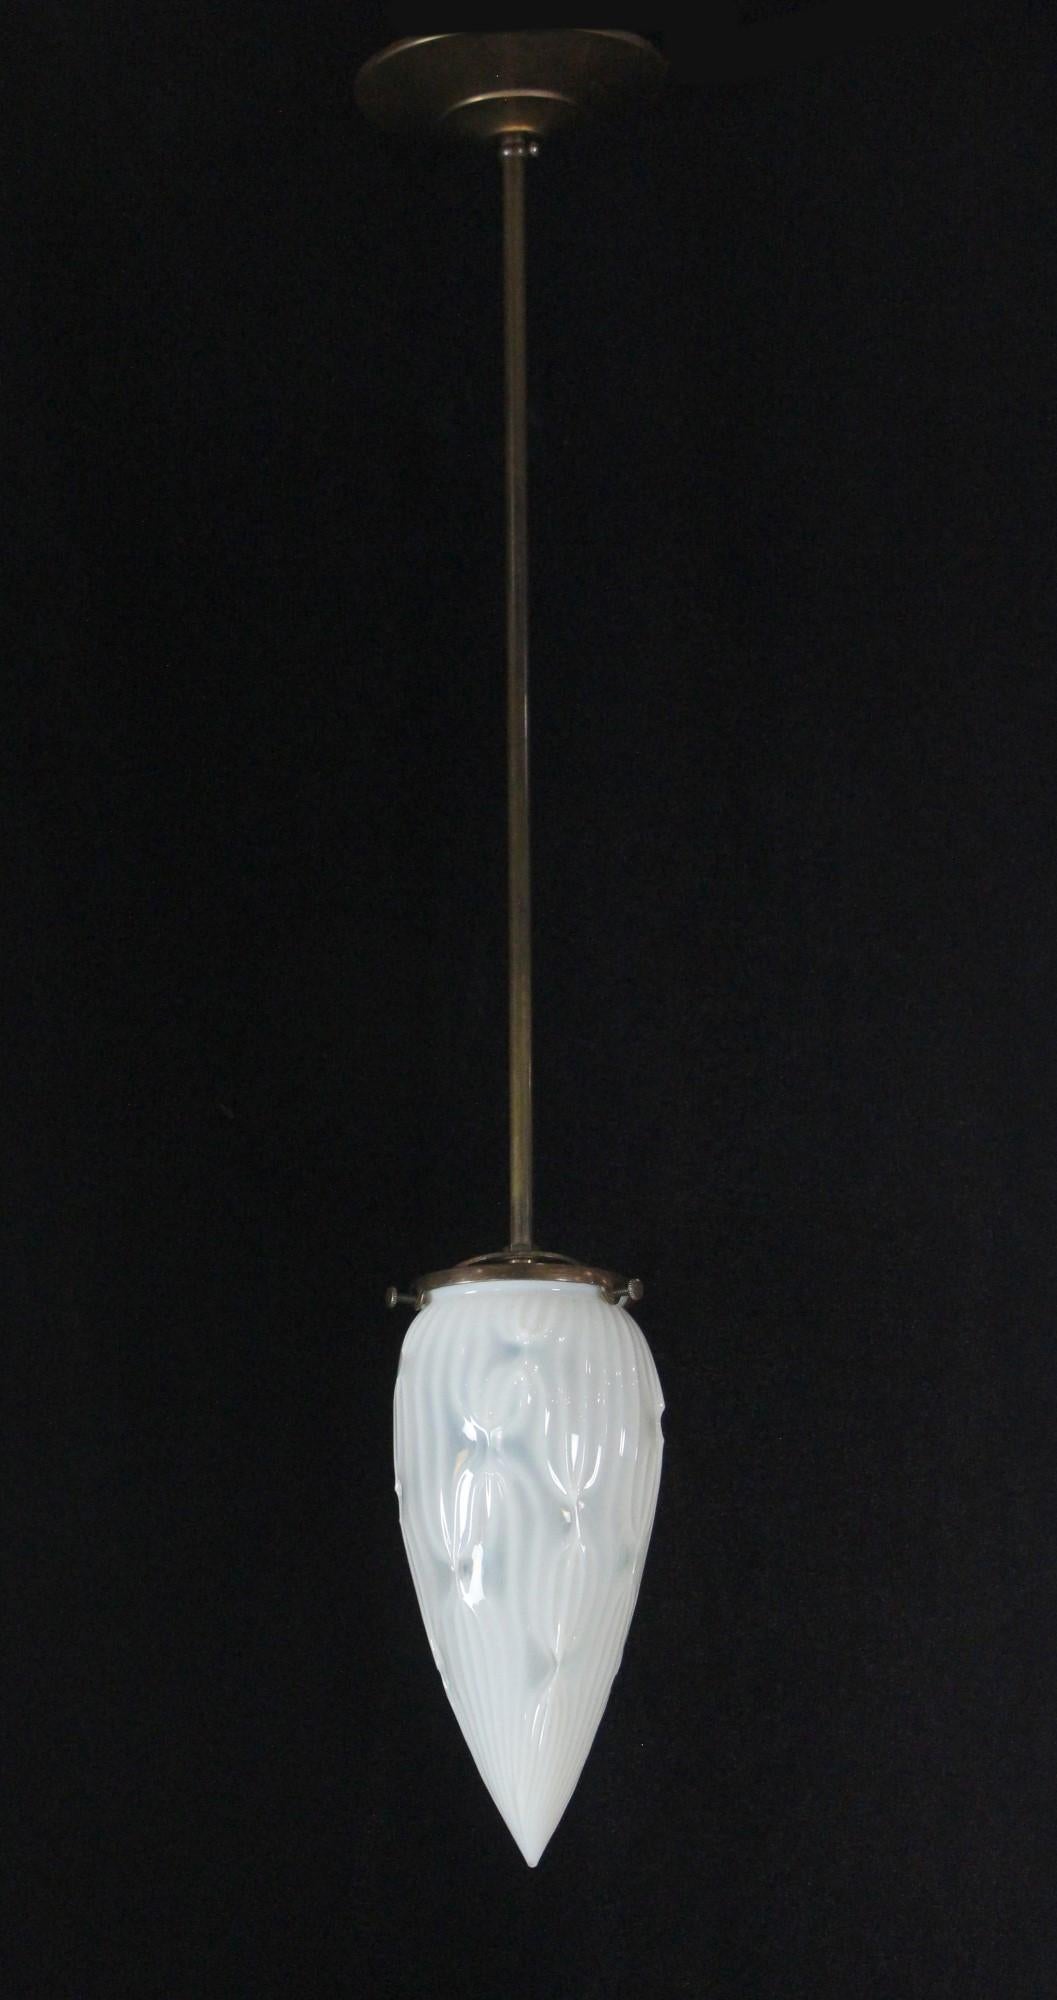 20th Century pendant light showing off a milky white opalescent cone shaped glass shade with new brass hardware. Cleaned and rewired. Please note, this item is located in our Scranton, PA location.